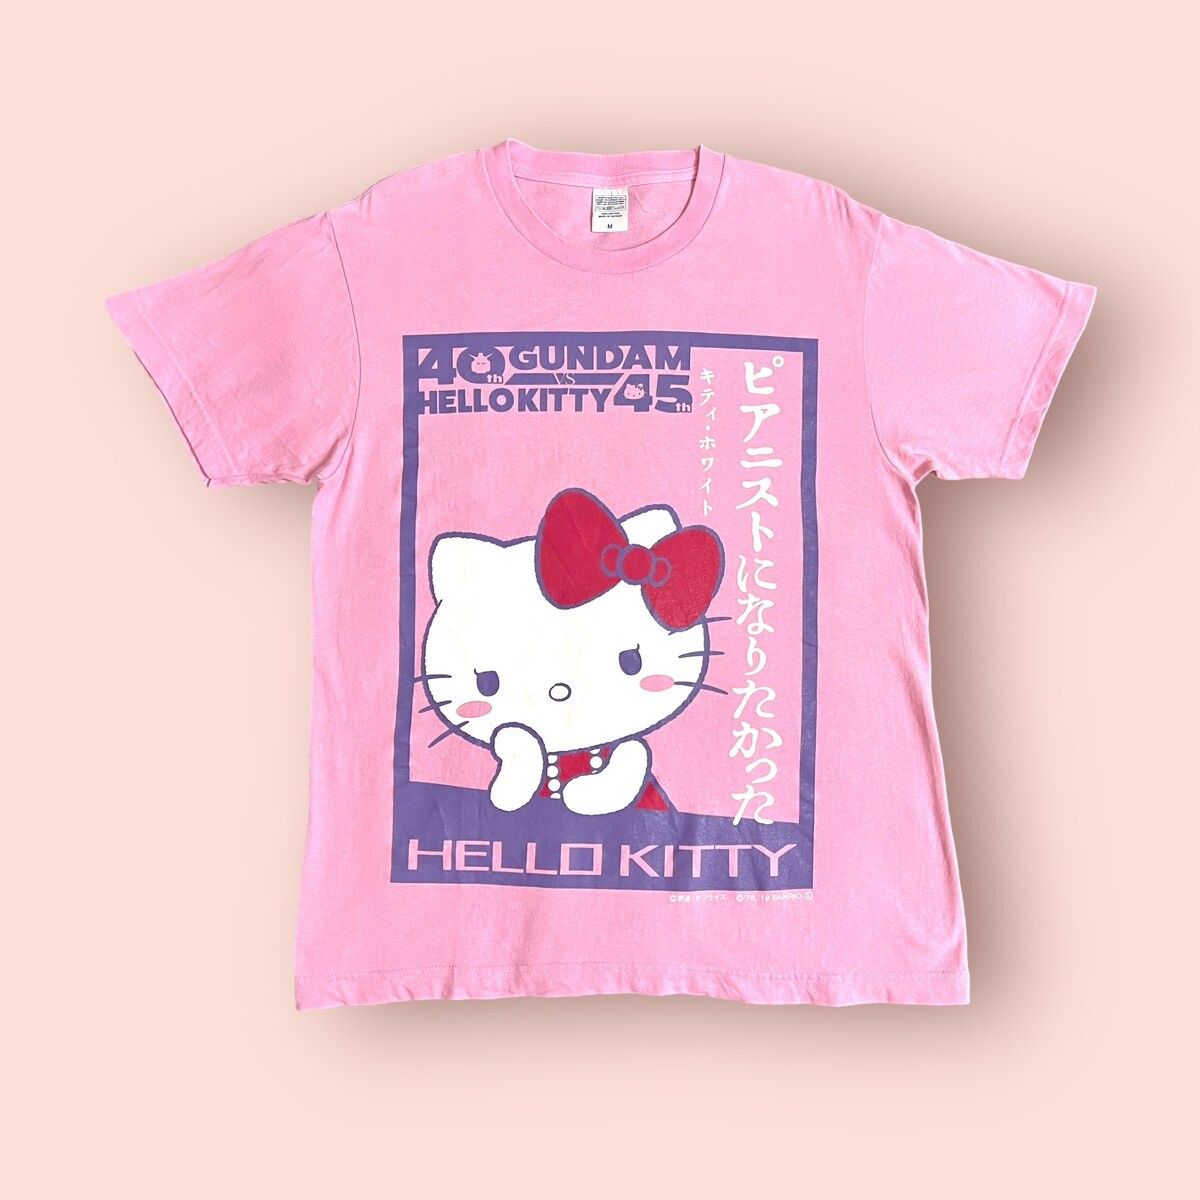 Japanese Brand LIMITED EDITION 2019 GUNDAM X HELLO KITTY PINK TEE IN PINK Size US M / EU 48-50 / 2 - 1 Preview